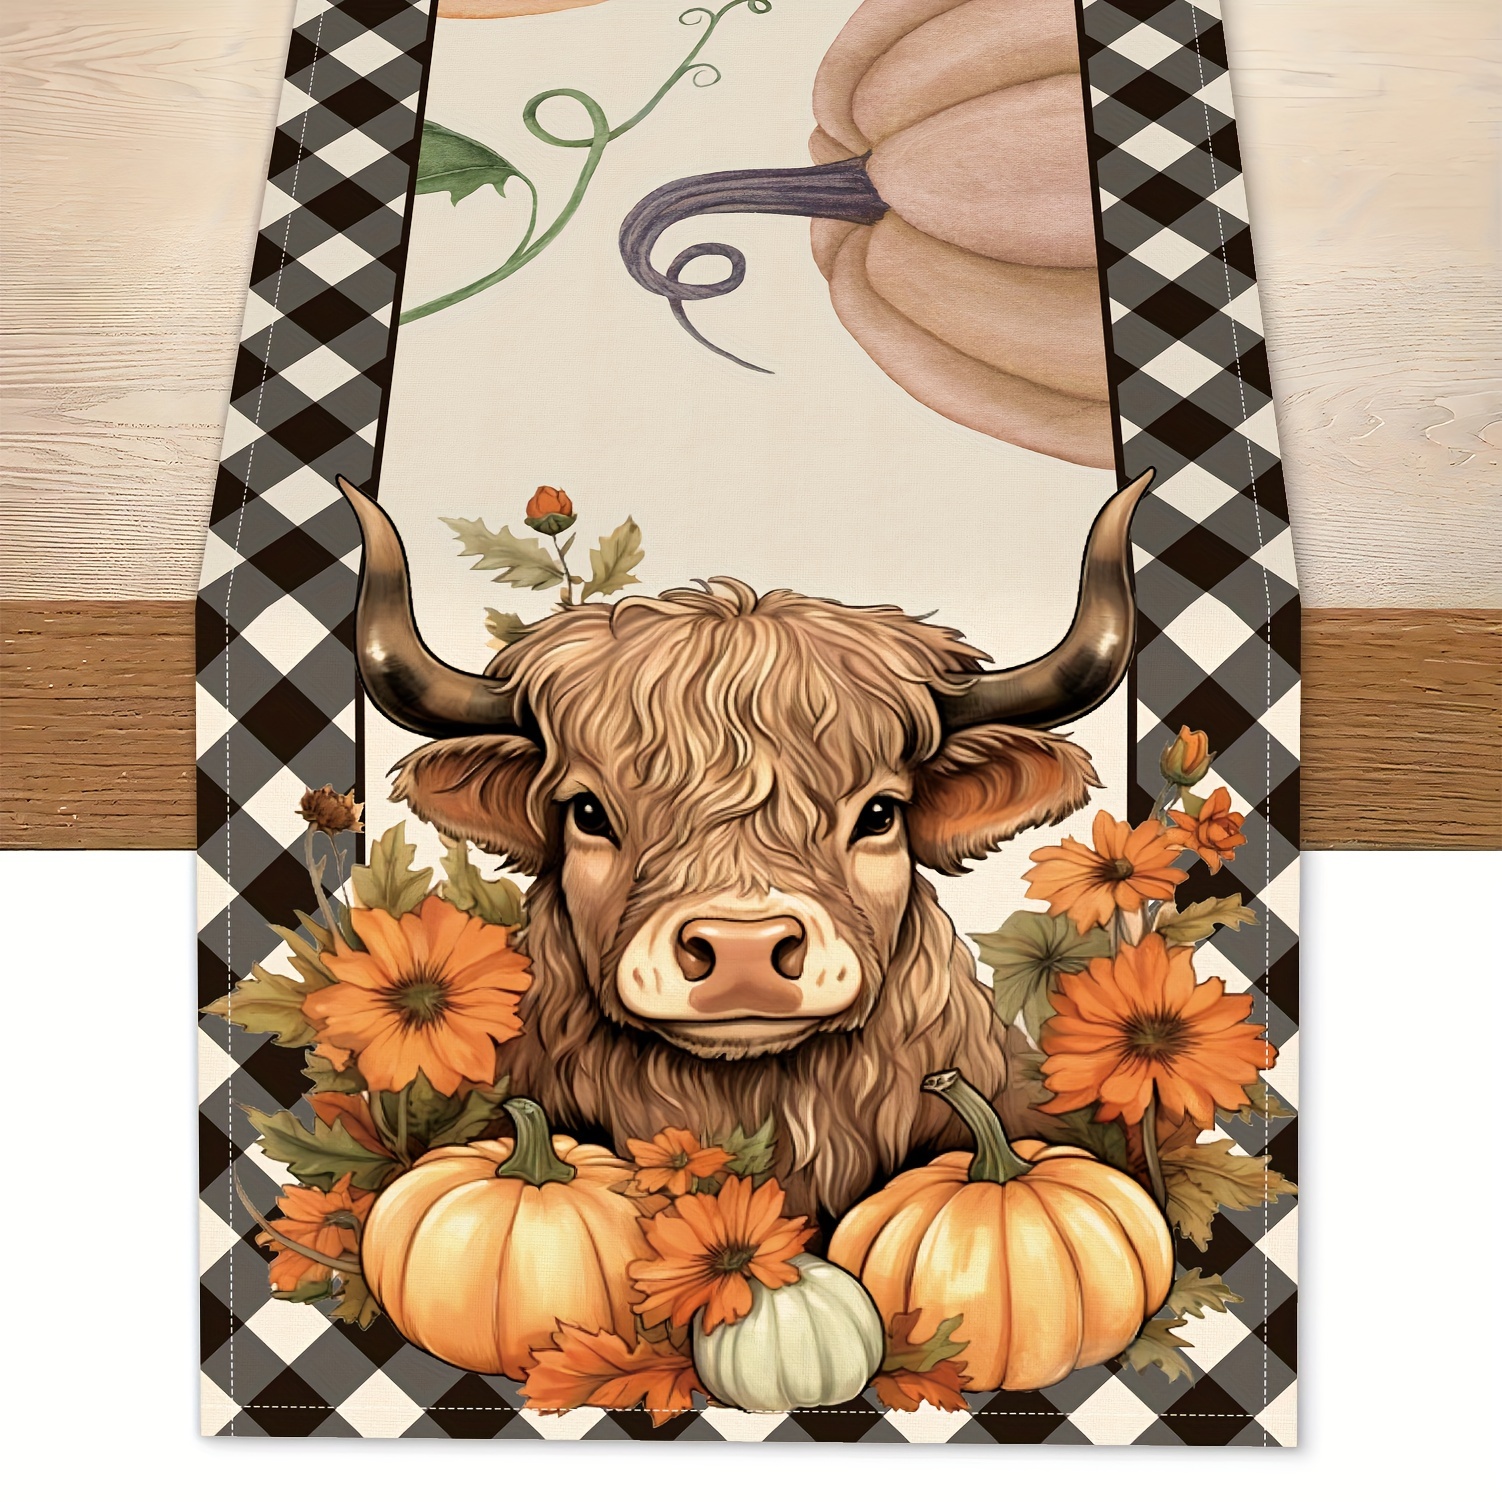 

Autumn Harvest Cow & Pumpkin Table Runner - Black & White Buffalo Plaid, Polyester, Rectangular - Perfect For Home Party & Dining Decor